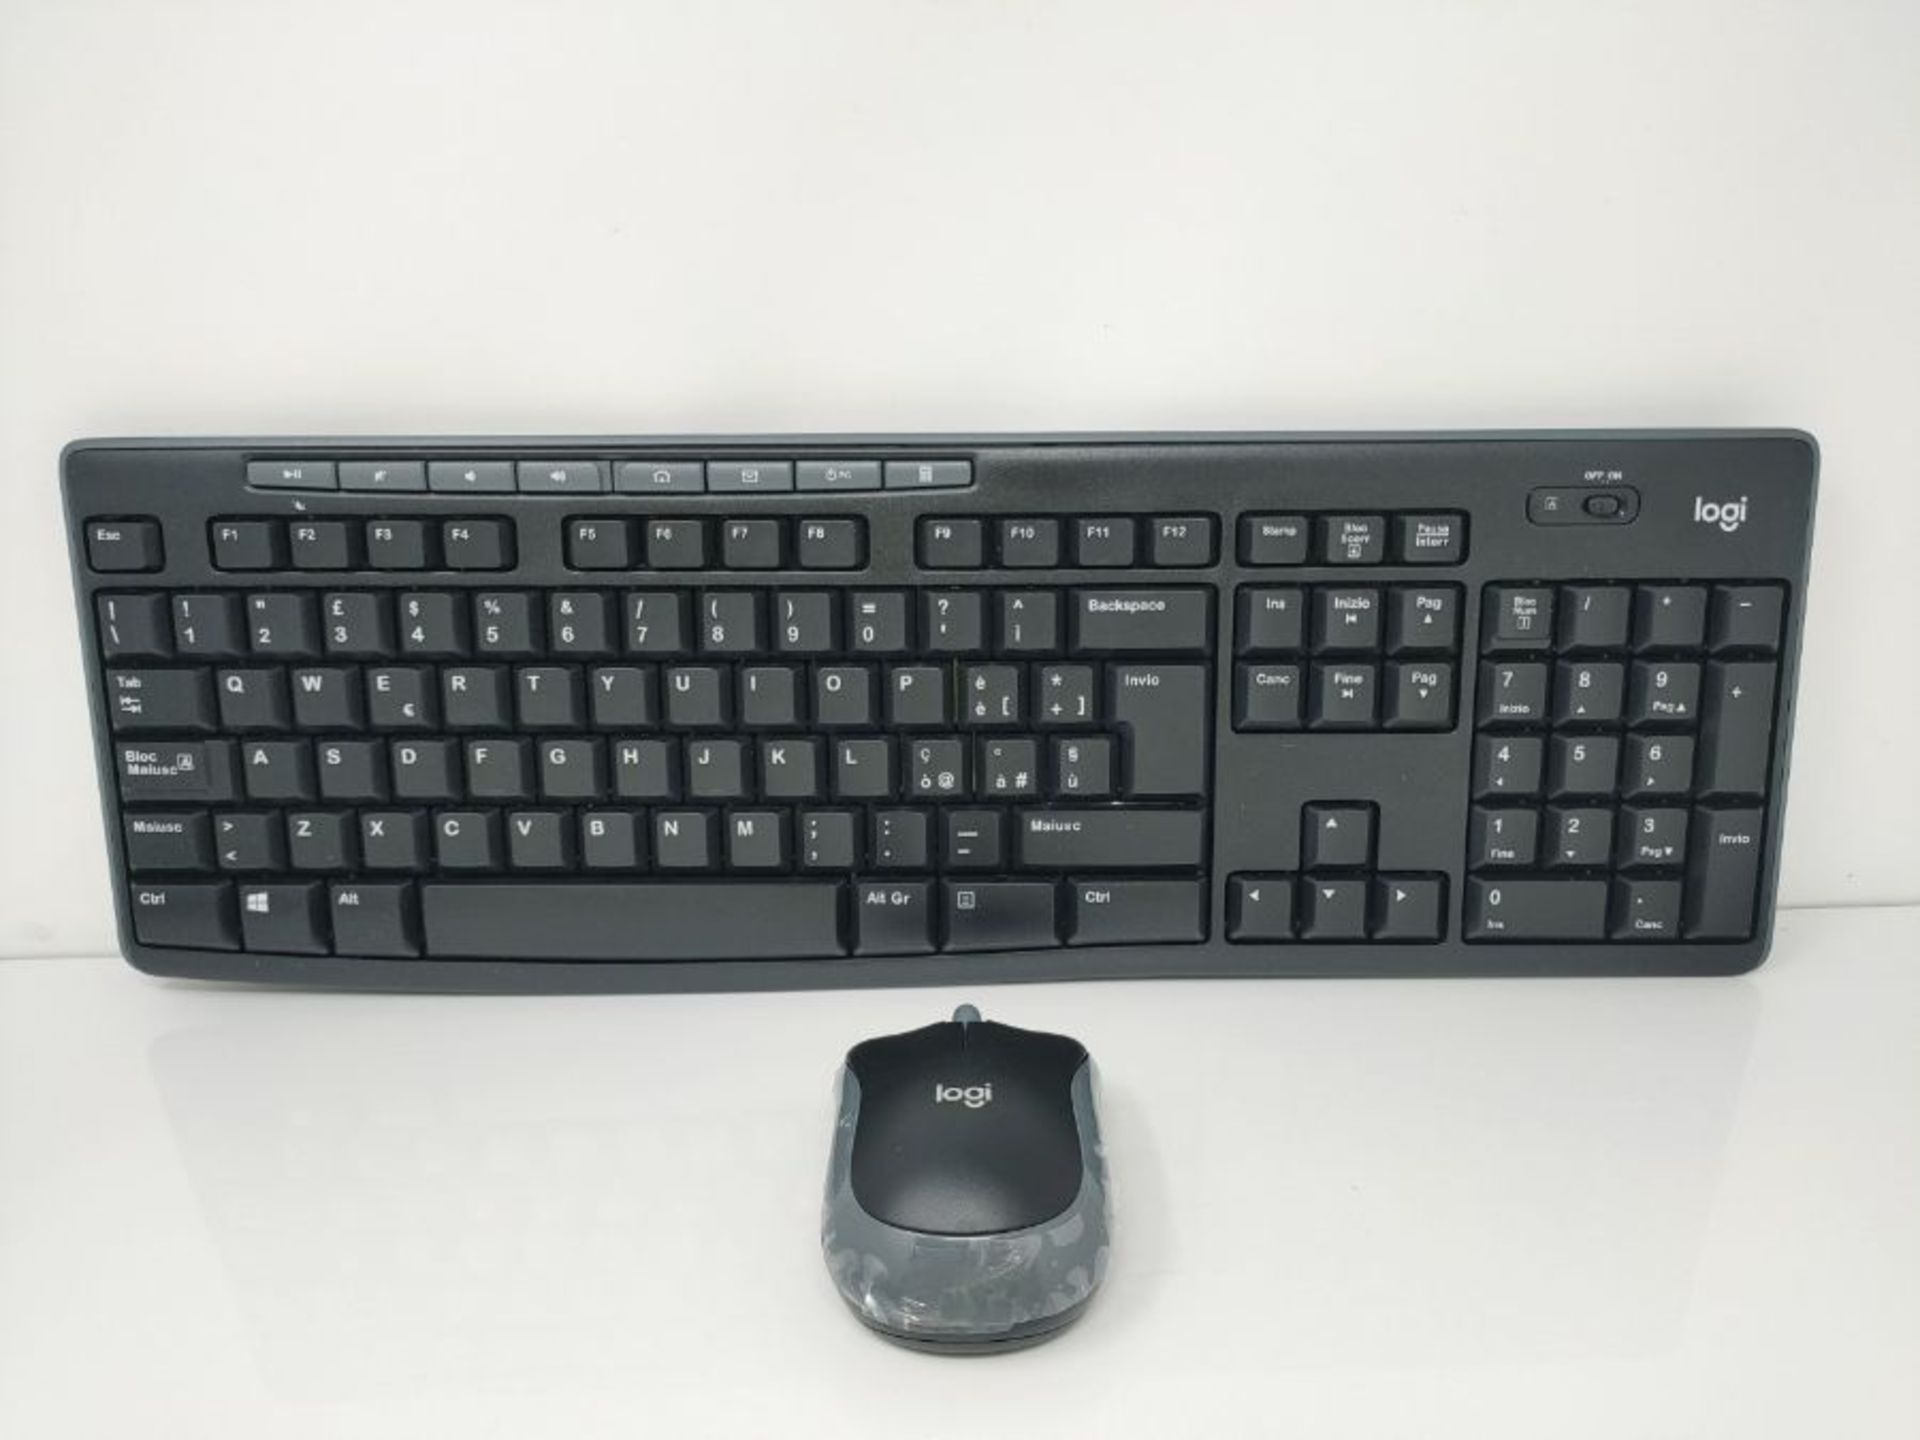 Logitech MK270 Wireless Keyboard and Mouse Combo for Windows, QWERTY Italian Layout - - Image 2 of 2